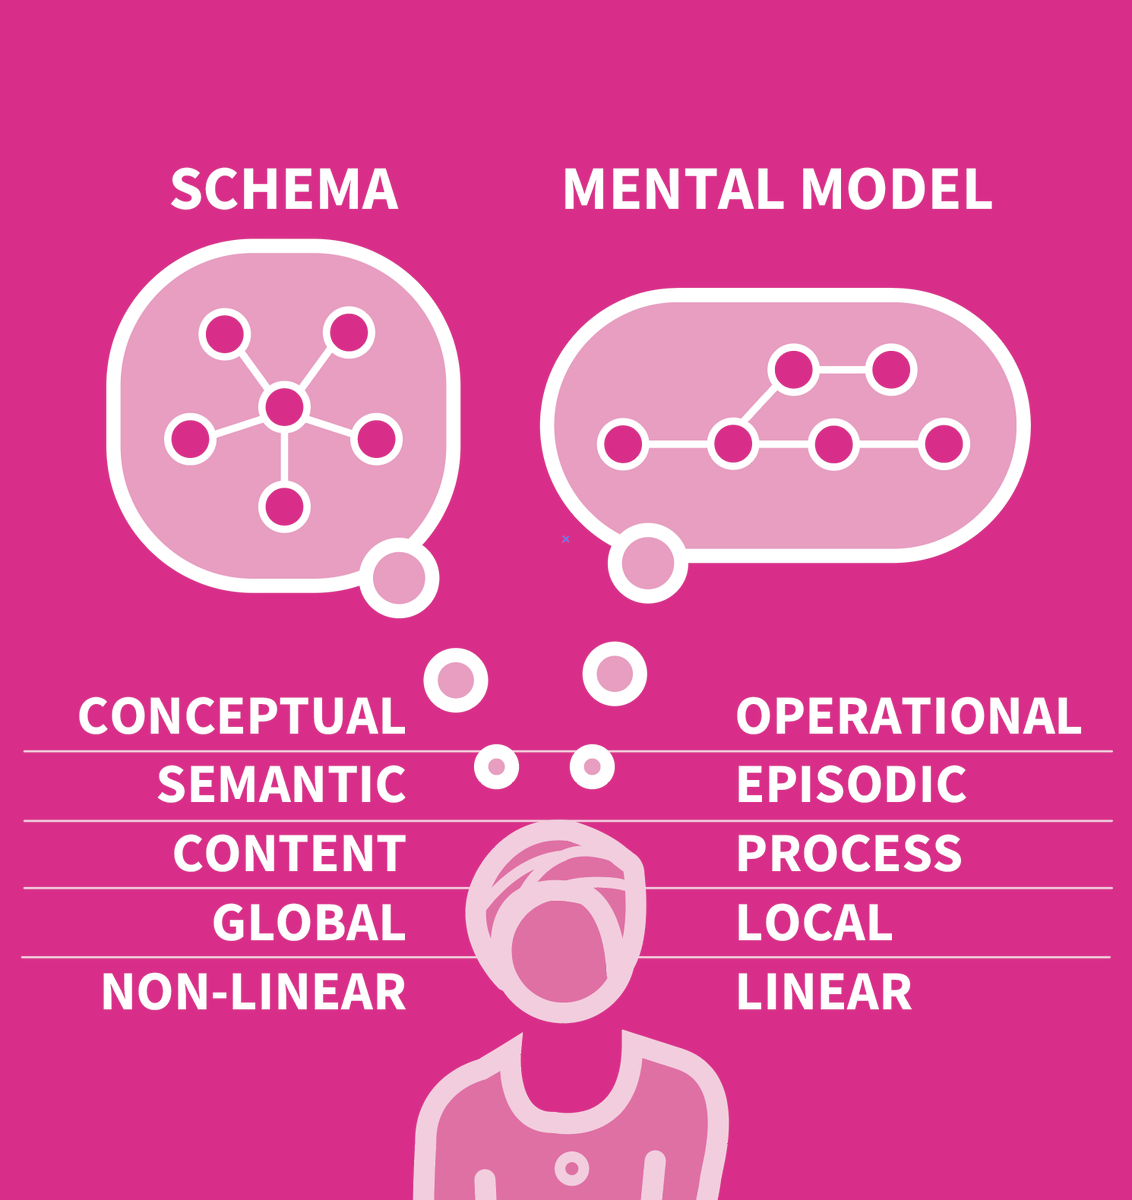 @Emma_Turner75 It may be useful to think of the two (training & implementation) in terms of the image below. Training aims to increase your schema — conceptual content. Implementation involves mental models — how to put the concepts into action. Operational. It relies on experience.